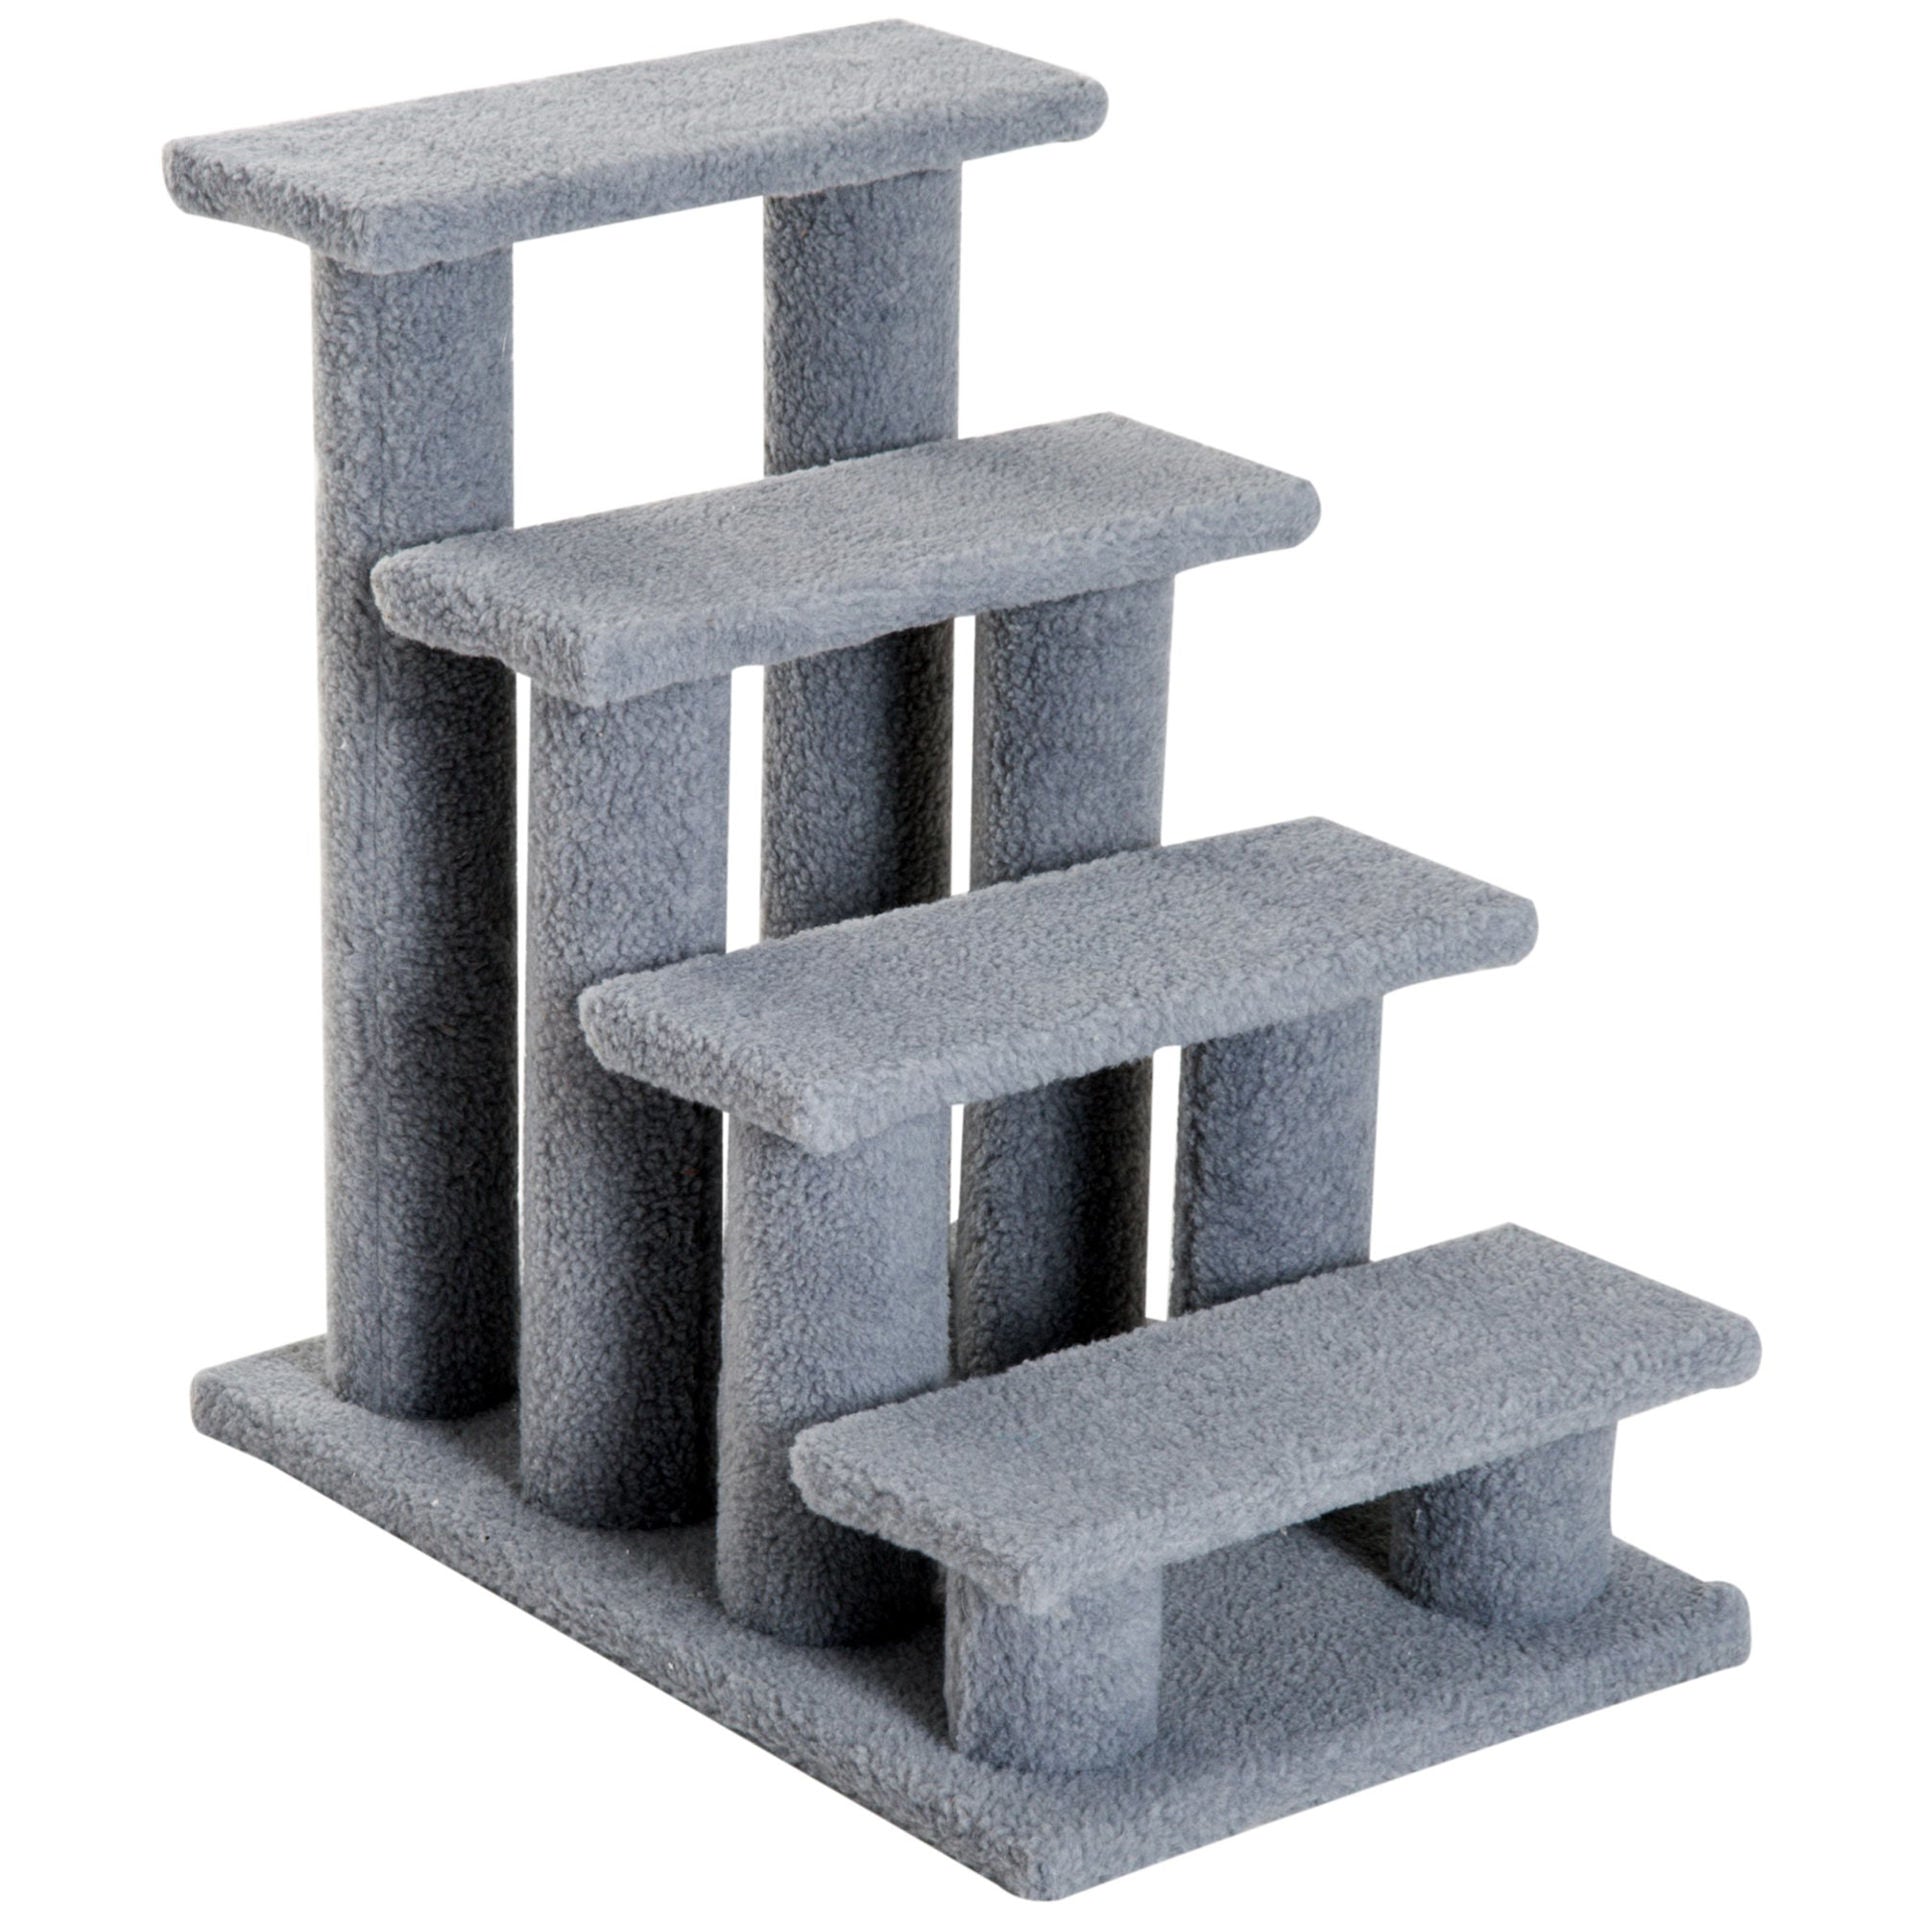 Nancy's Alliance Animal Stairs Cat Stairs Dog Stairs Stairs for cats and dogs 4 steps